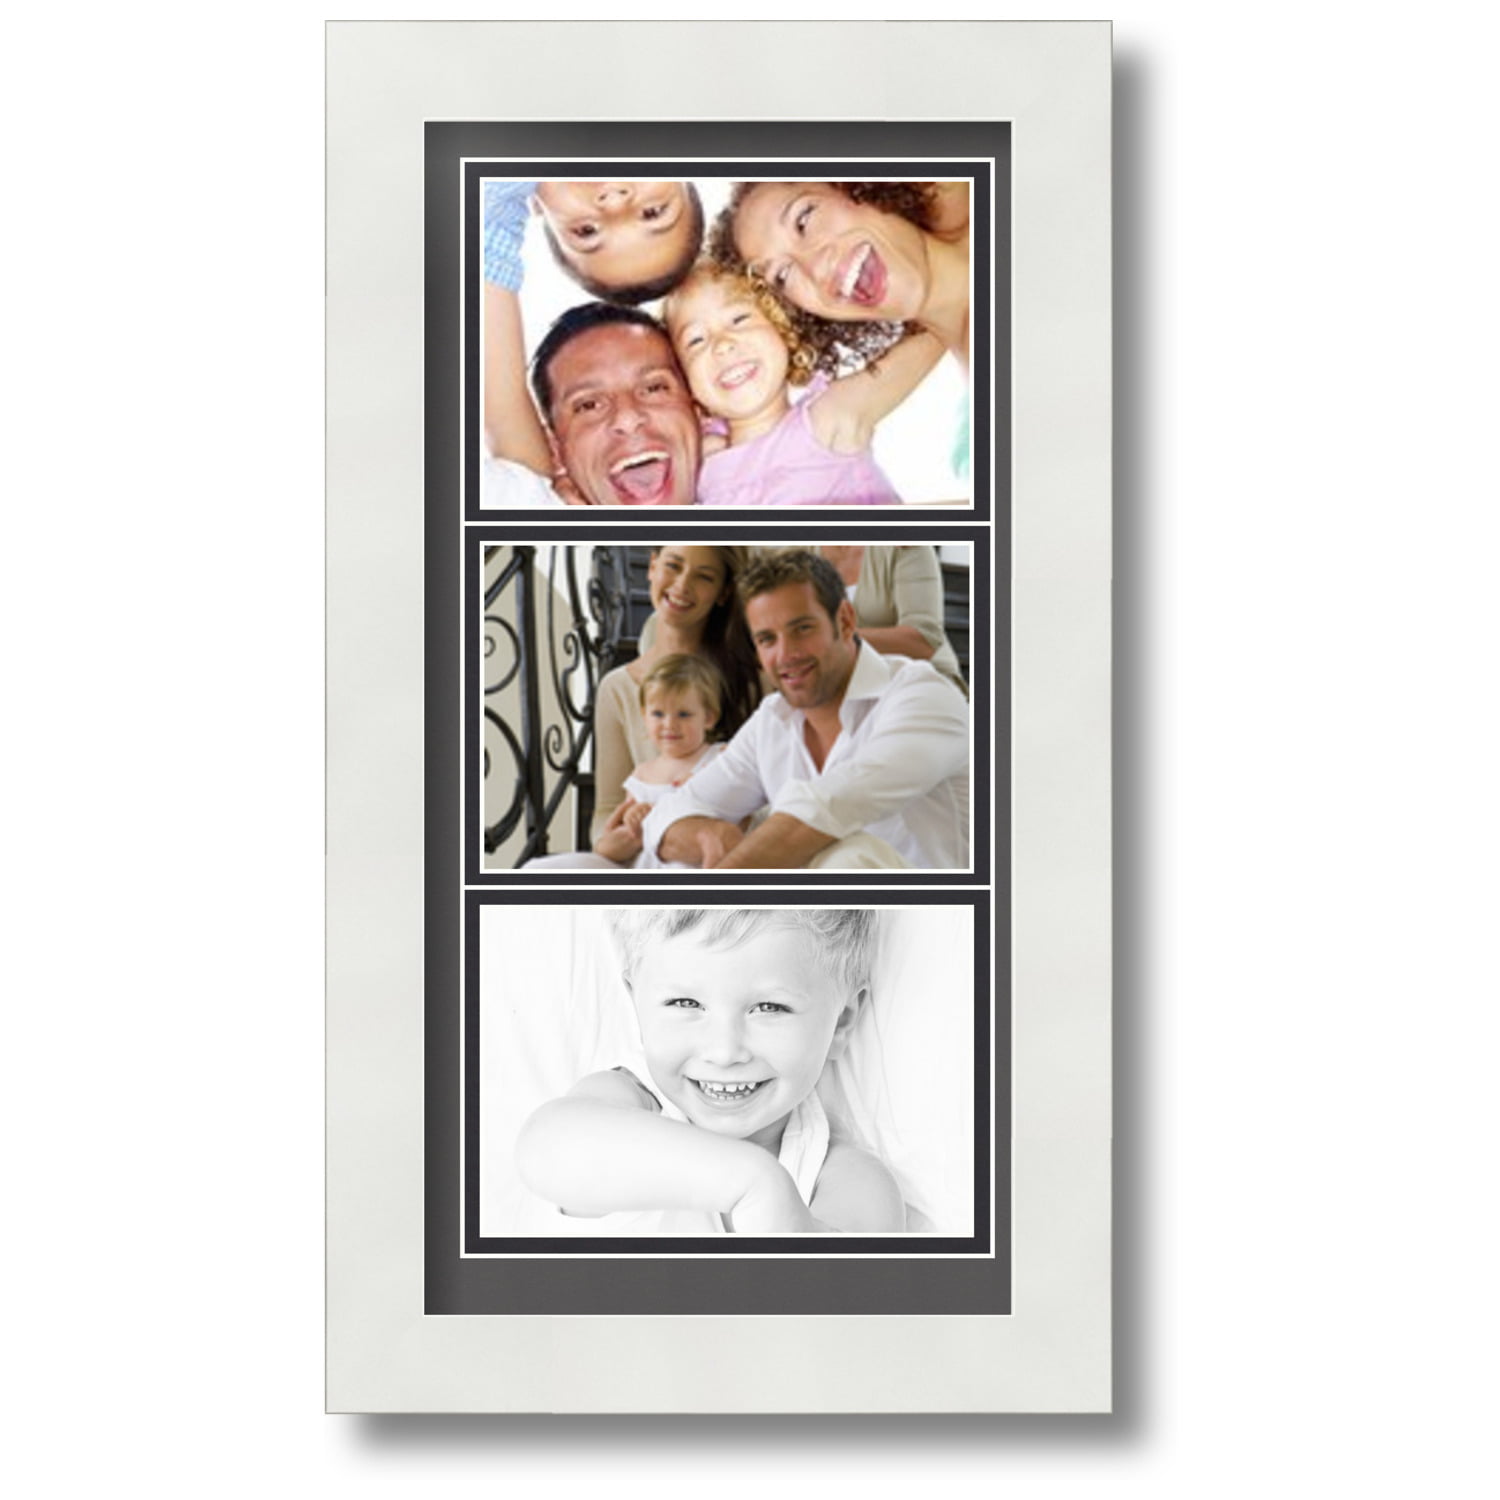 4x5 Picture Frame, Four Photos Frame, Family Collage Frame, 4